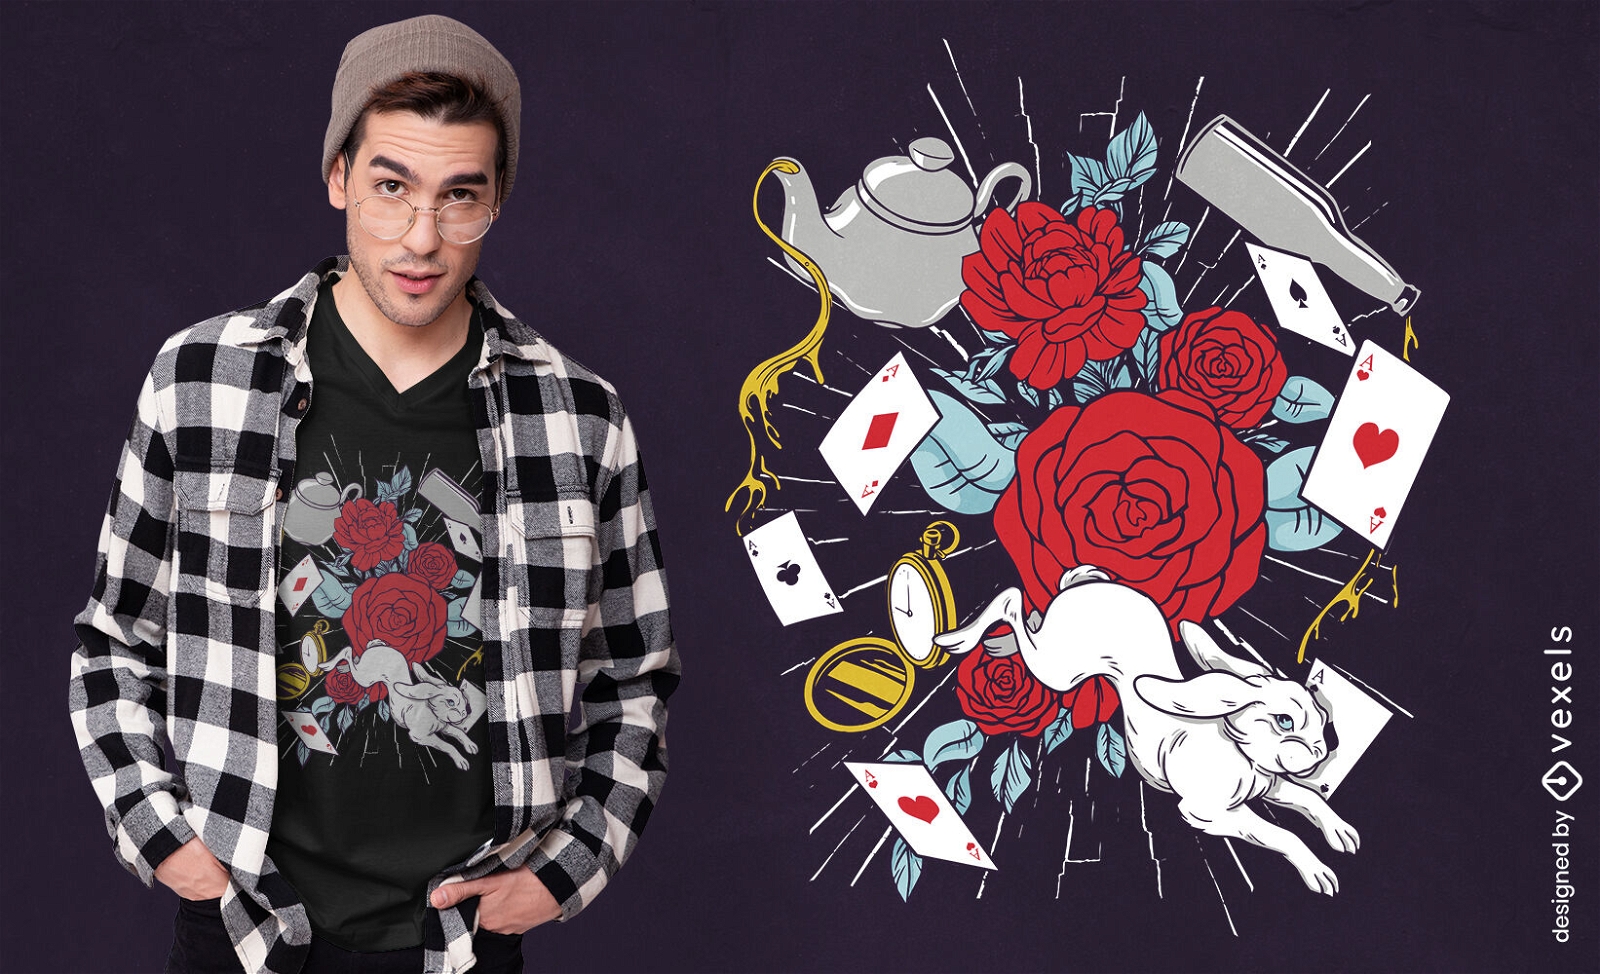 Roses and playing cards t-shirt design